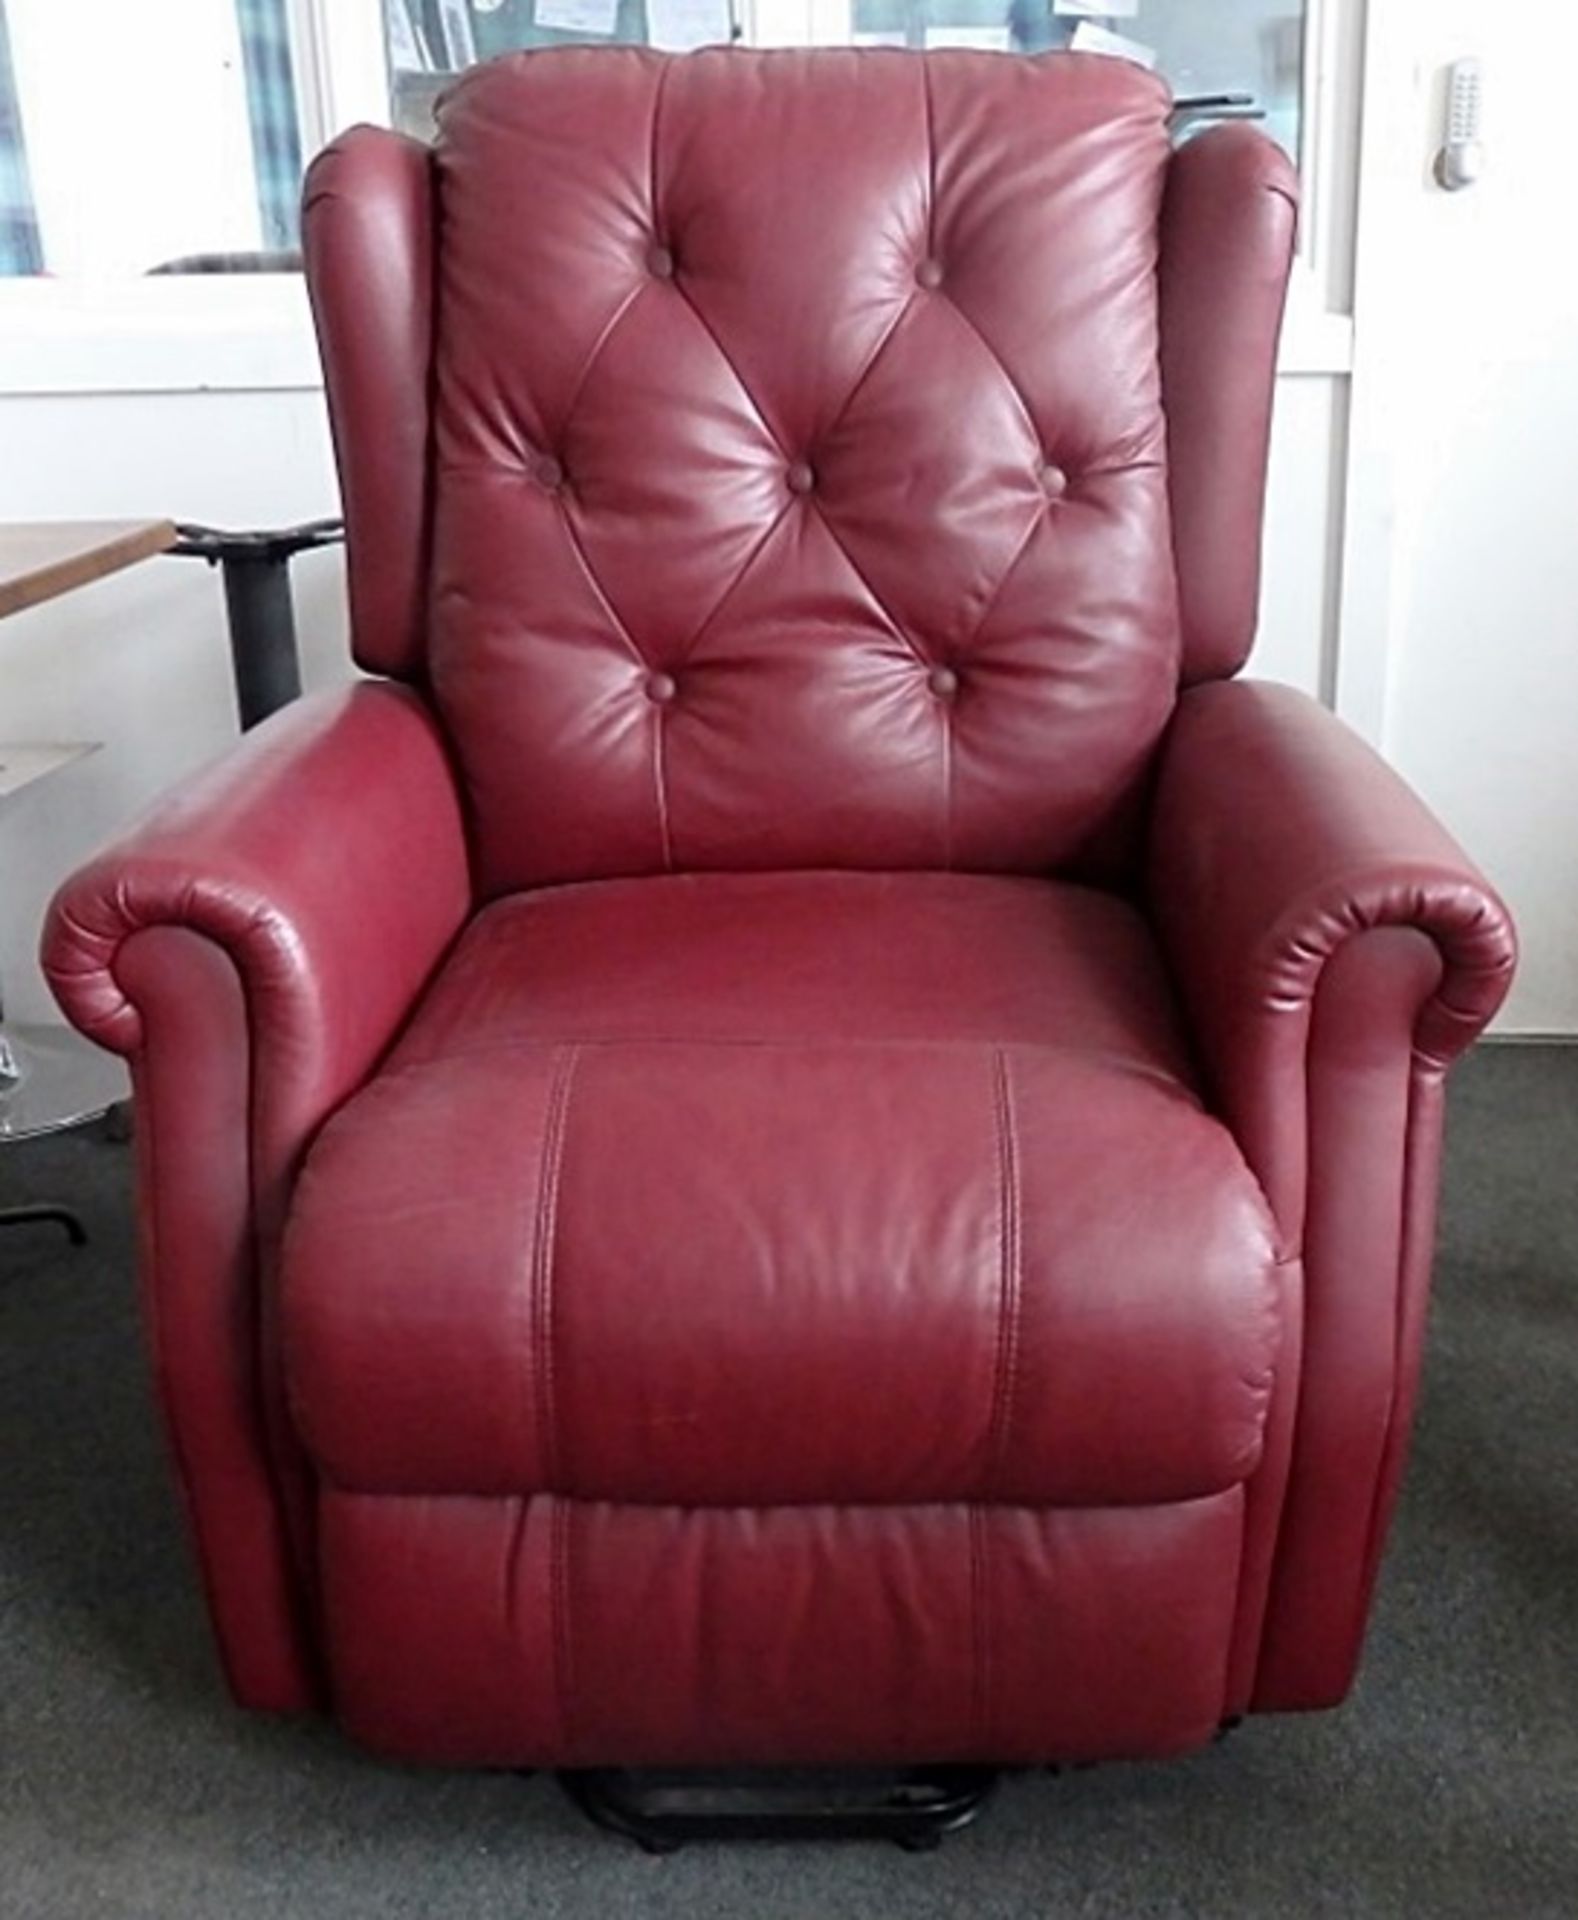 1 x "Beatrice" Riser Recliner Chair By TCS - Upholstered In Genuine Italian Leather (Red) - Pocket